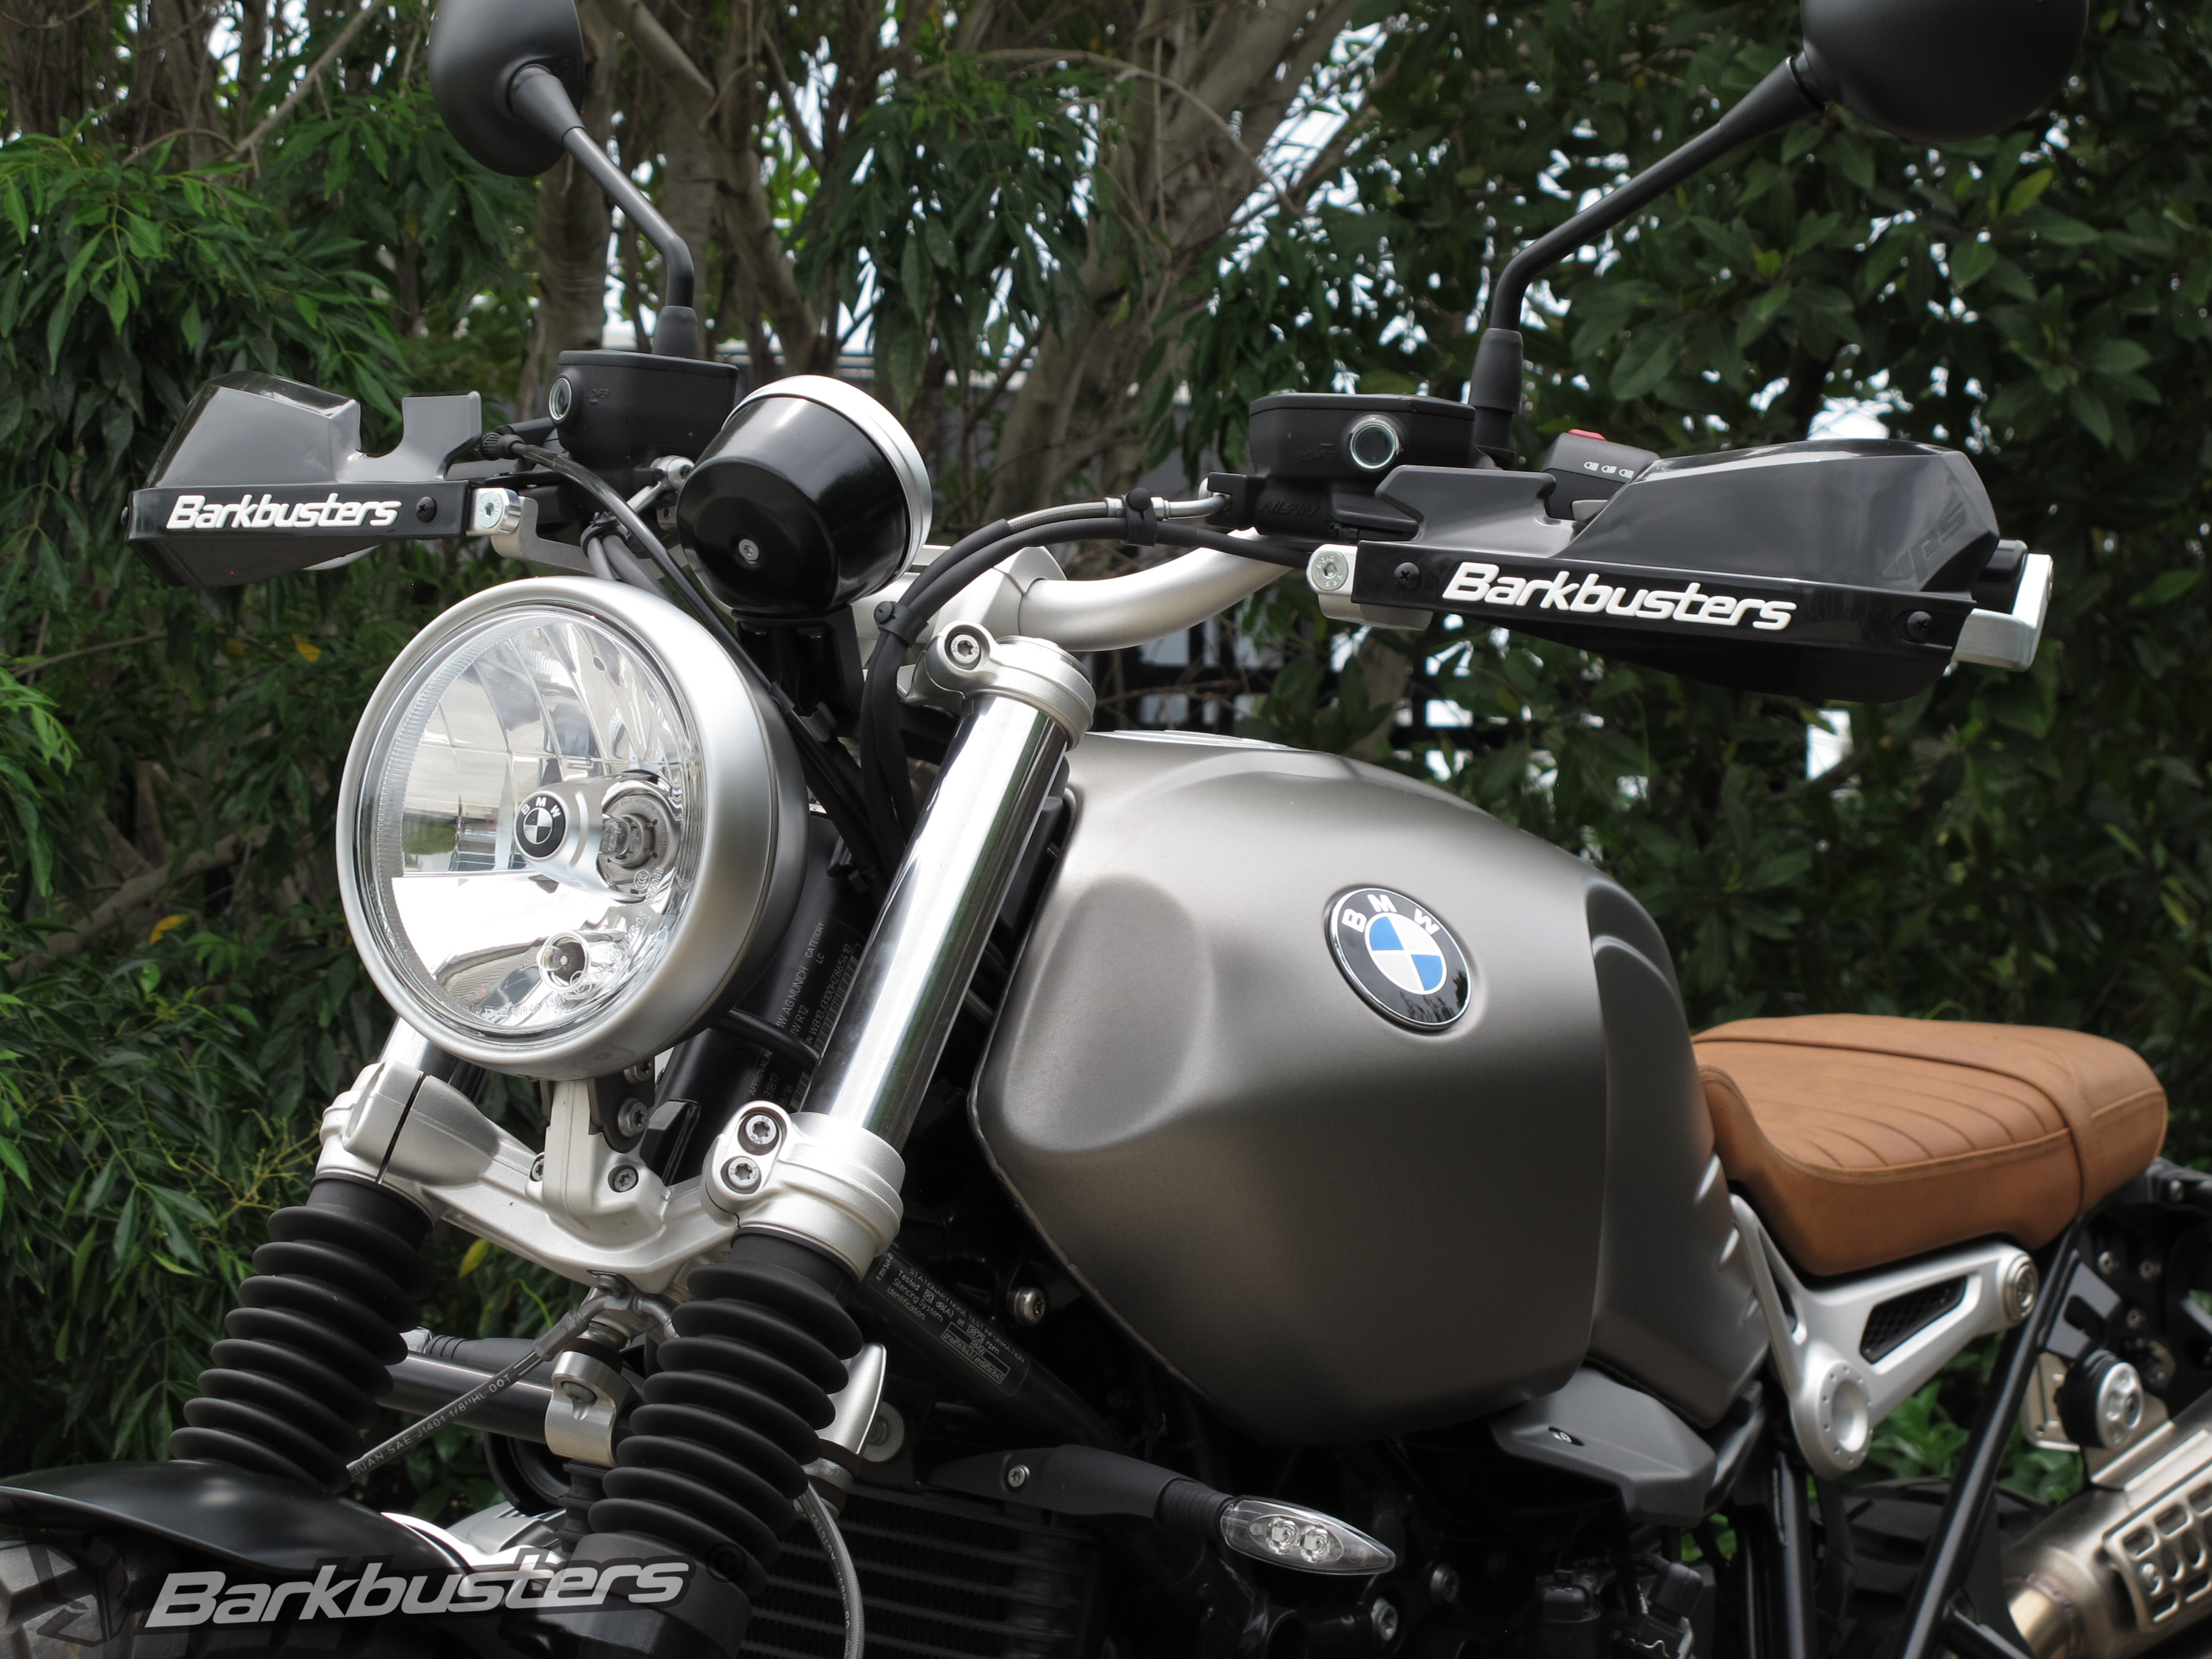 BARKBUSTERS Handguard Hardware Kit (Code: BHG-064) fitted to BMW R Nine T Scrambler with Black VPS Guards (Code: VPS-003-BK) sold separately